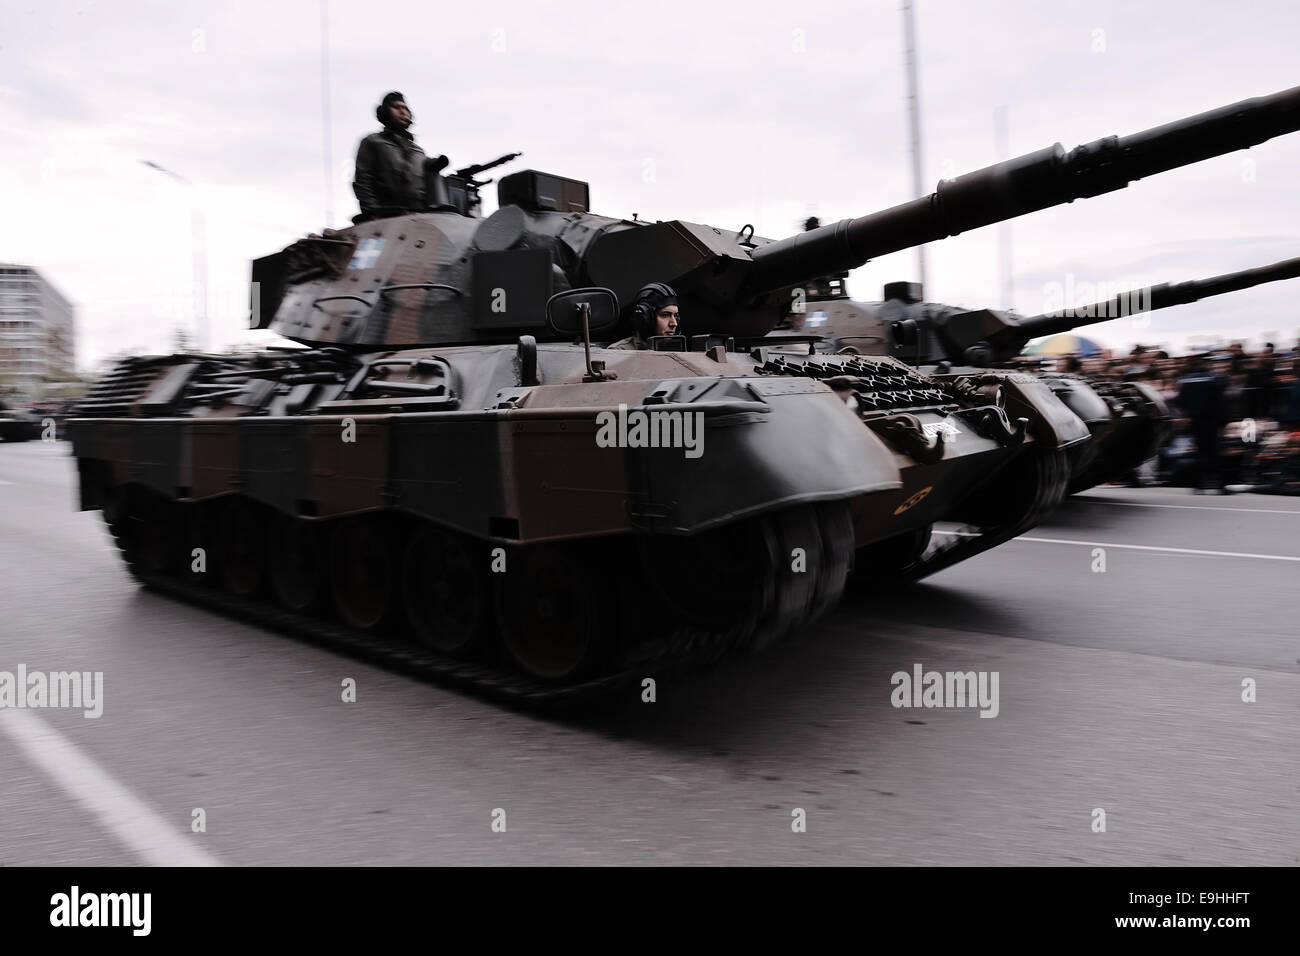 Thessaloniki, Greece. 28th October, 2014. A Leopard 1 A5 tank during the military parade that was held in Thessaloniki during the celebrations of the 28th of October anniversary, the date that Greece entered the World War II in 1940. Credit:  Giannis Papanikos/Alamy Live News Stock Photo